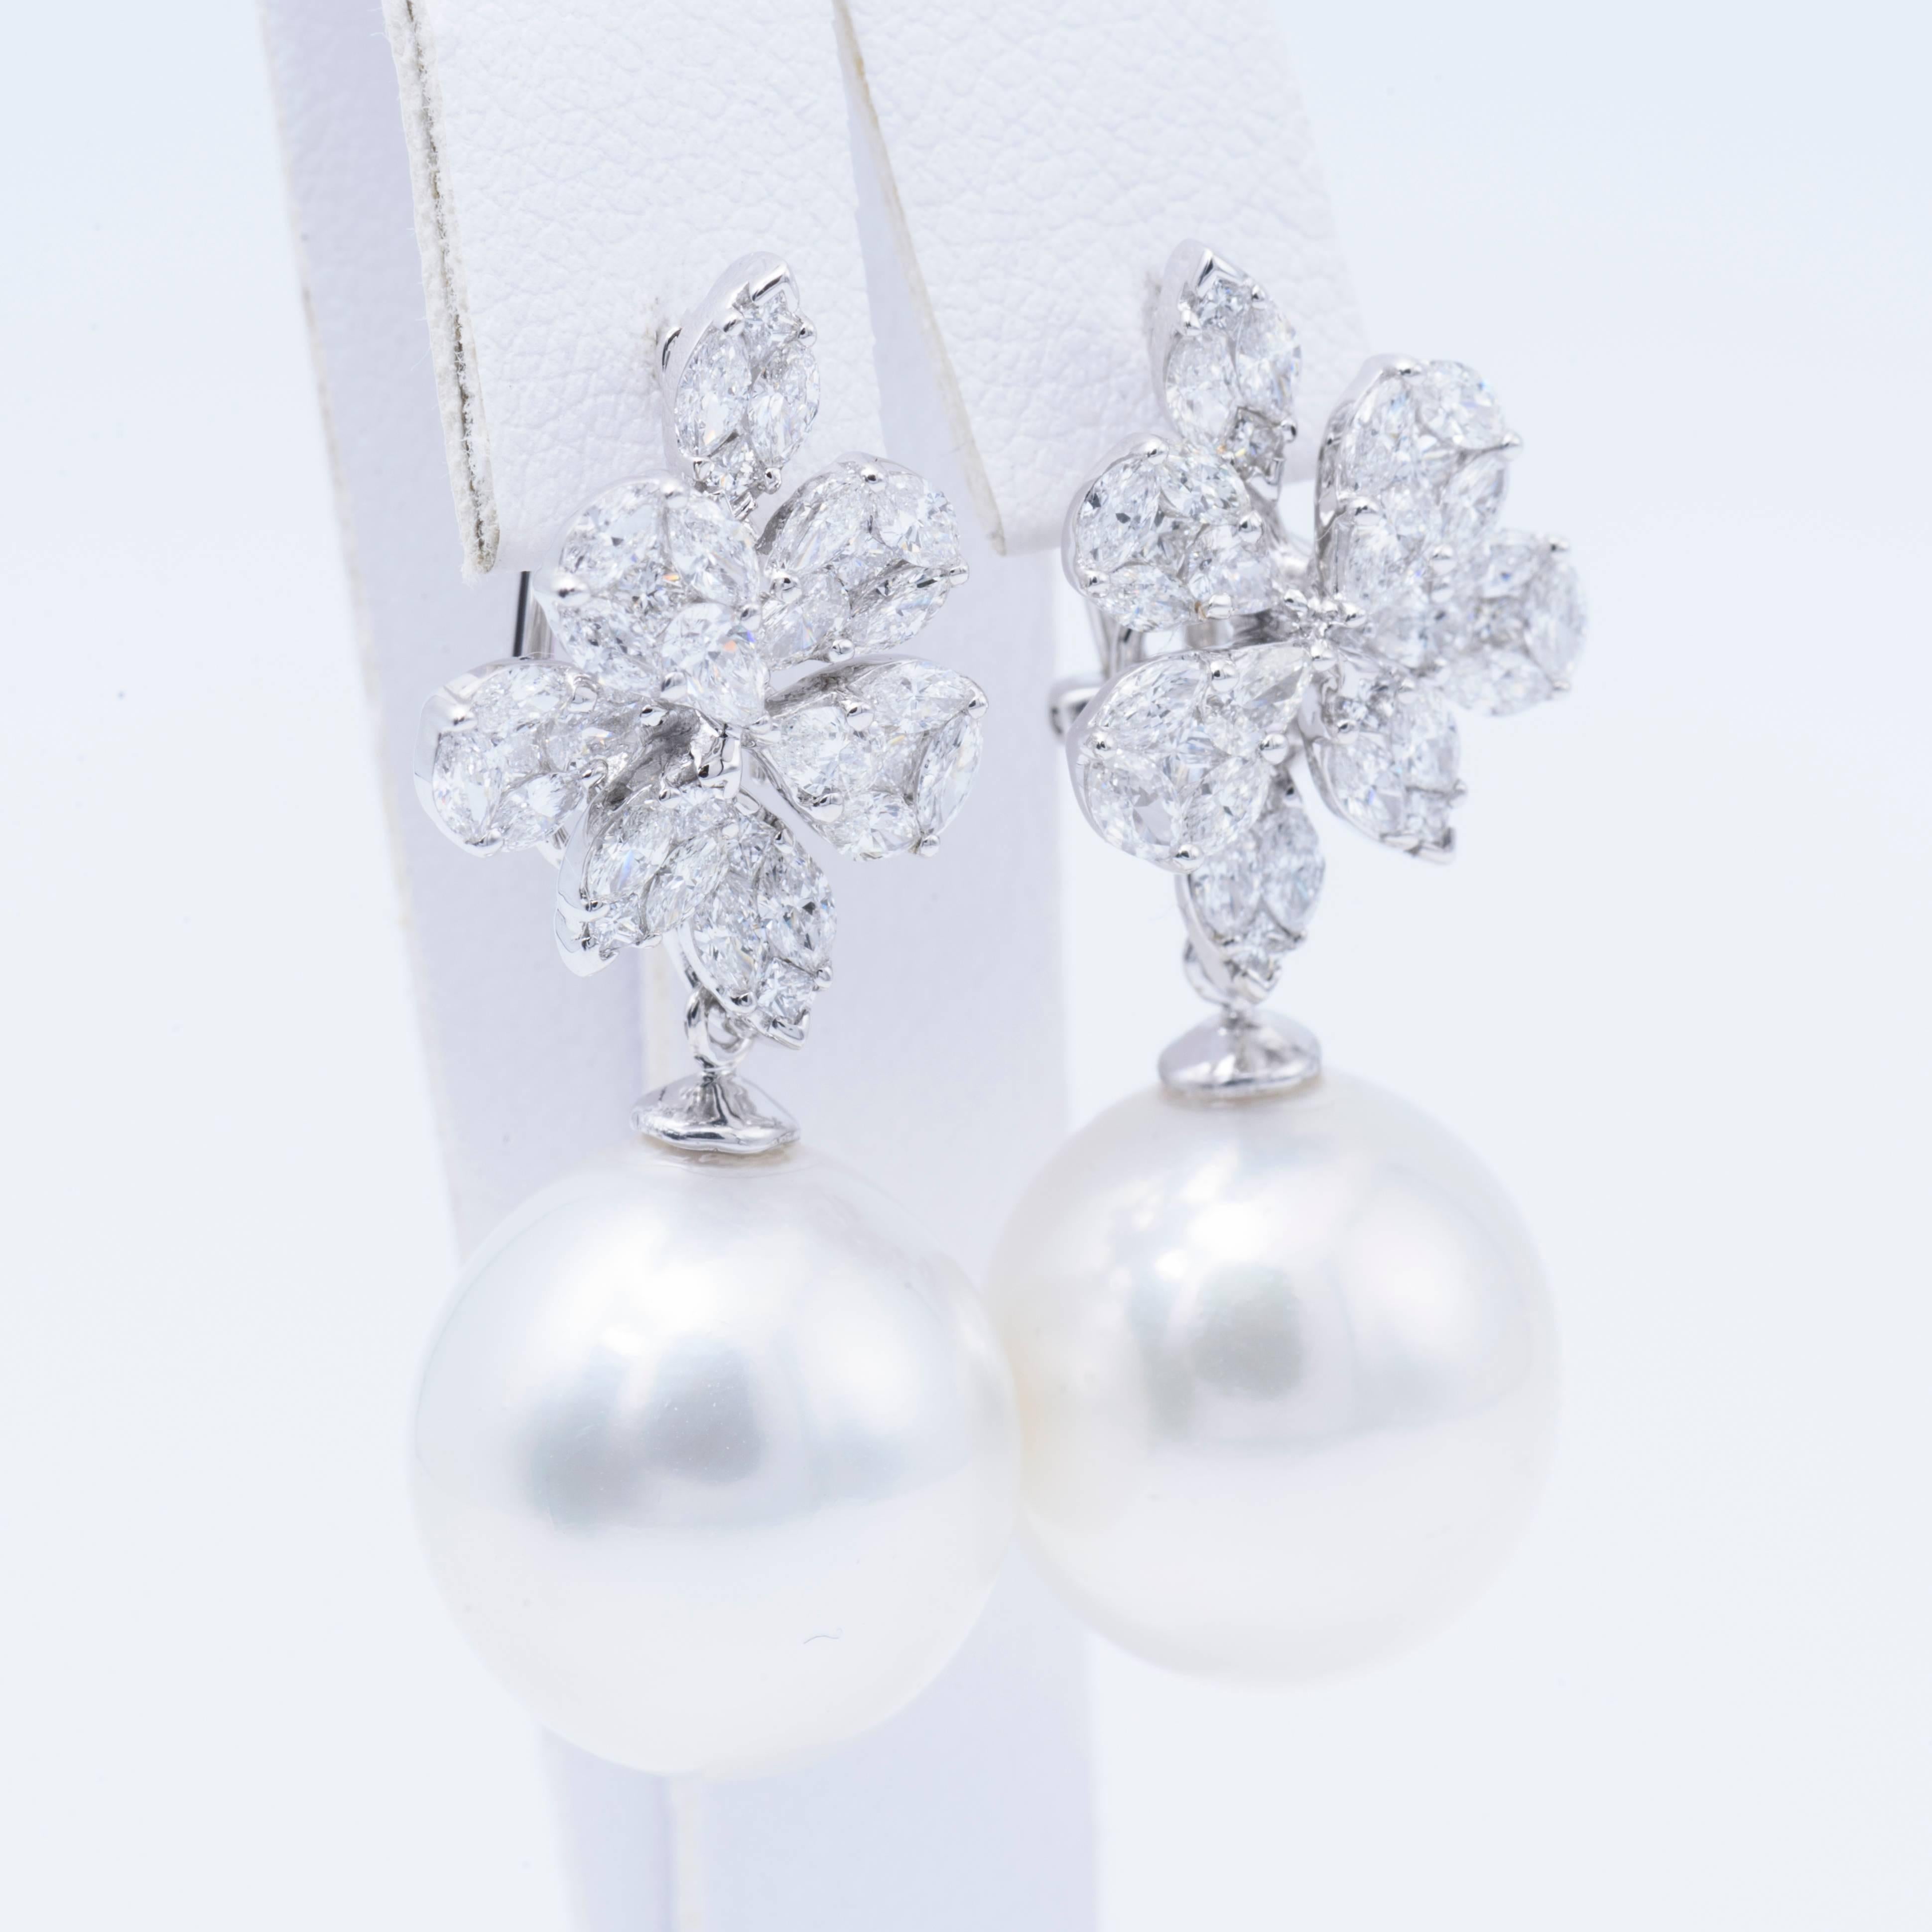 18K white gold 
2.14 Cts. round diamonds H Color and VS clarity
each South Sea Perl measures 14-15 mm
the earrings weight is 7 g.
and its 1.7